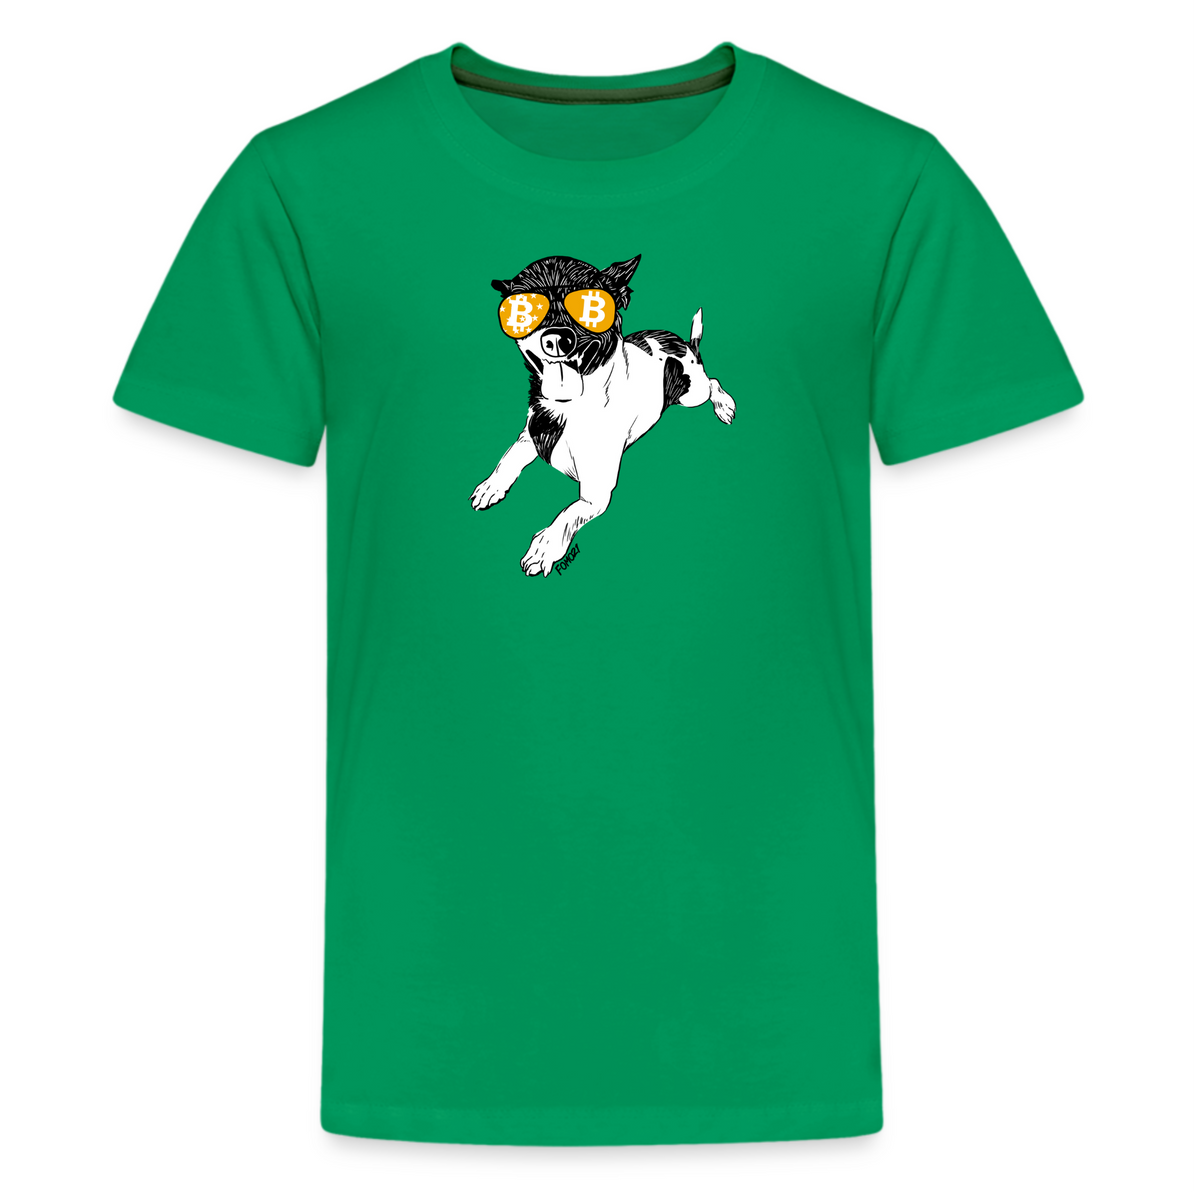 Bitcoin Is For The Chihuahuas Youth T-Shirt - fomo21